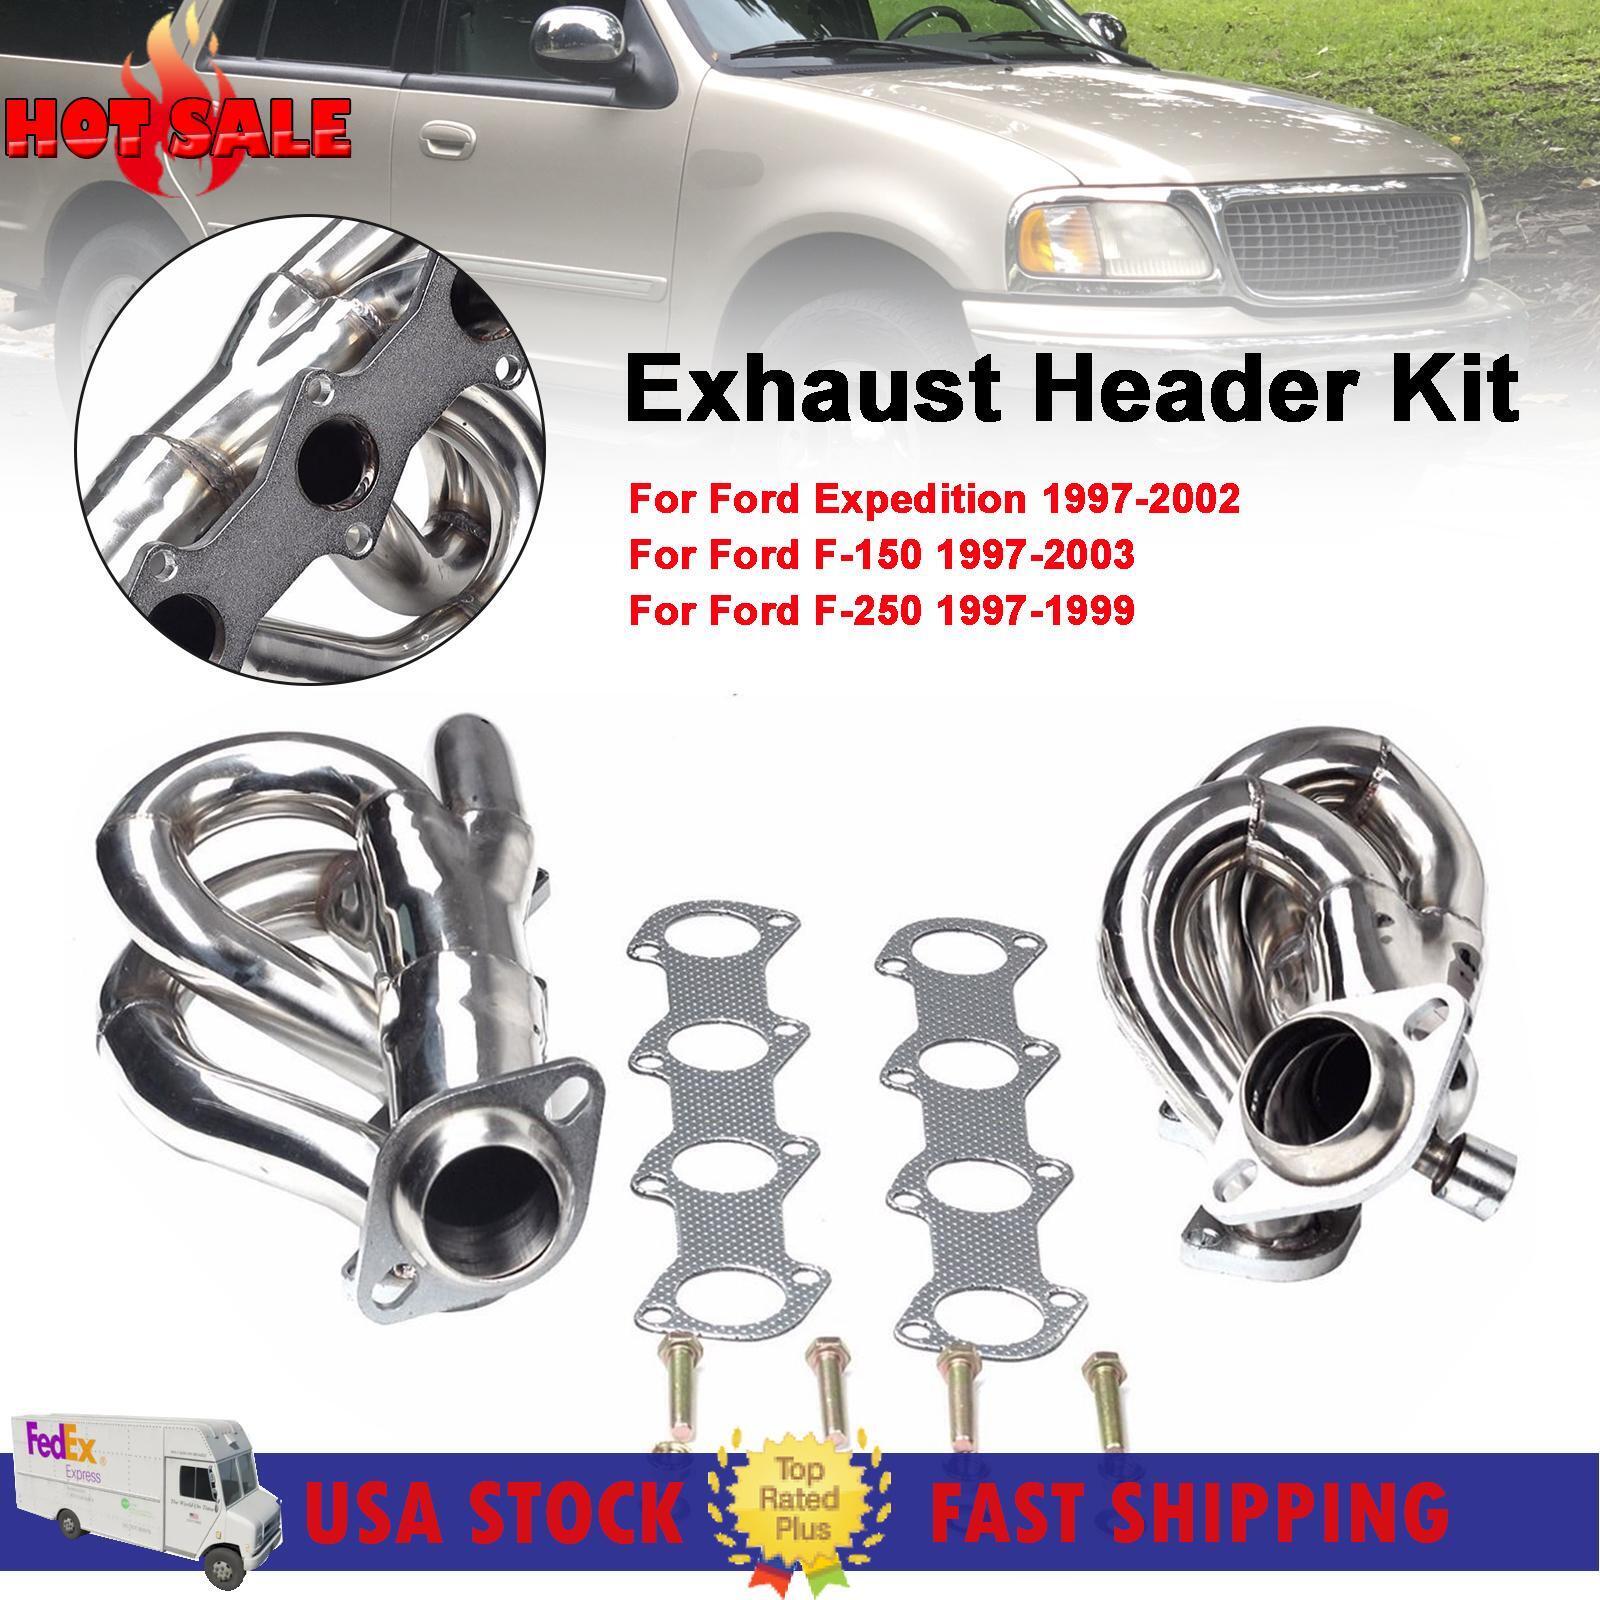 Tubular Shorty Exhaust Header Manifold Fit Ford Expedition 1997-2002 Fit F150